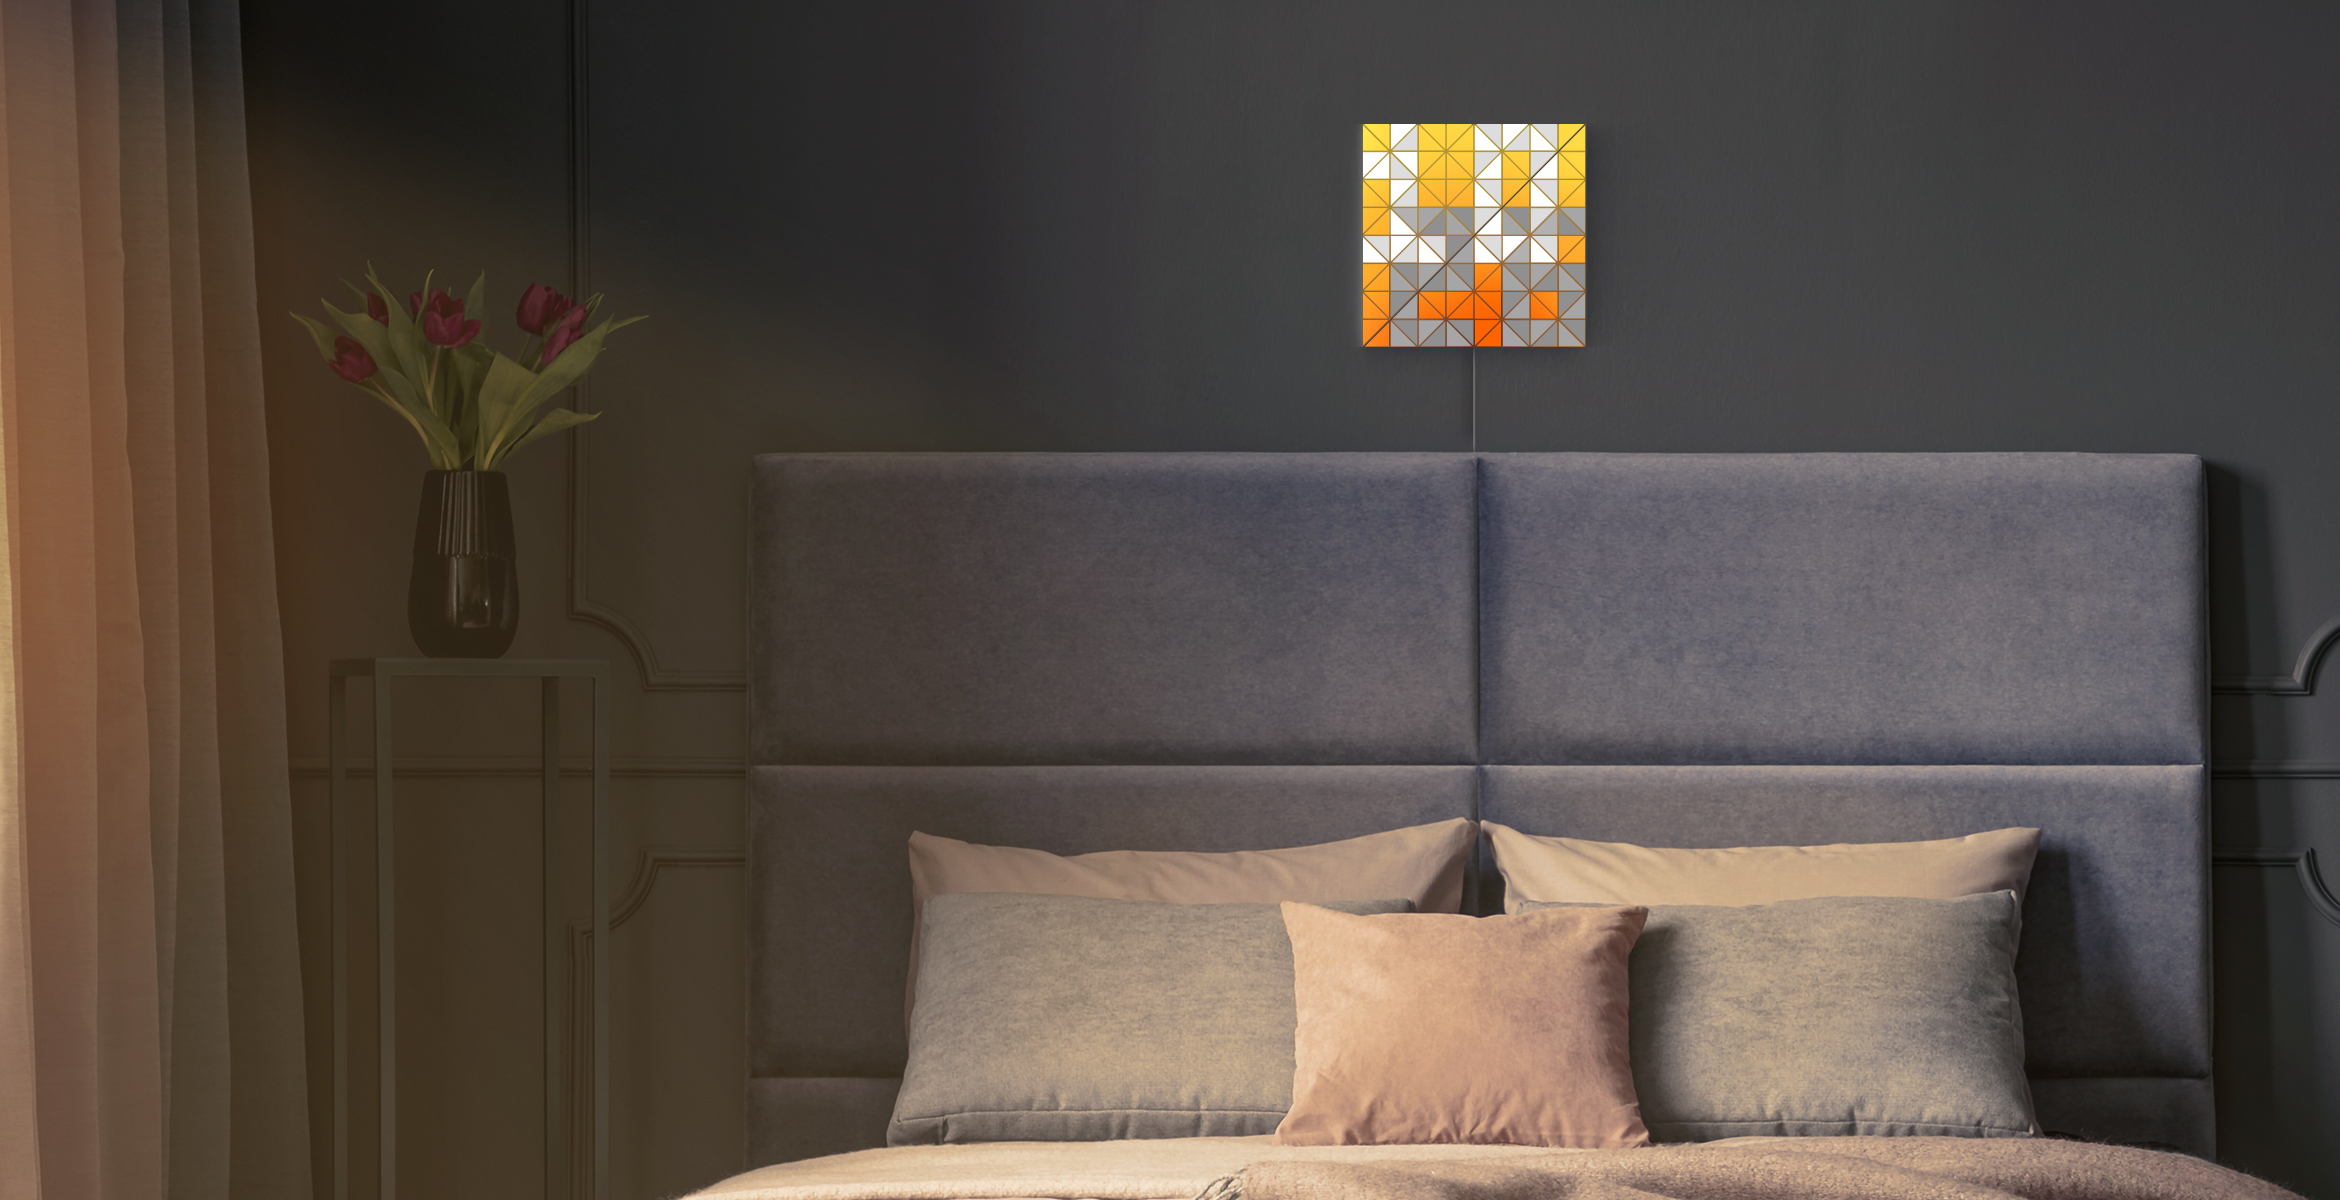 SKY face shape, assembled from 2 smart light surfaces, displays time and complements bedroom's interior